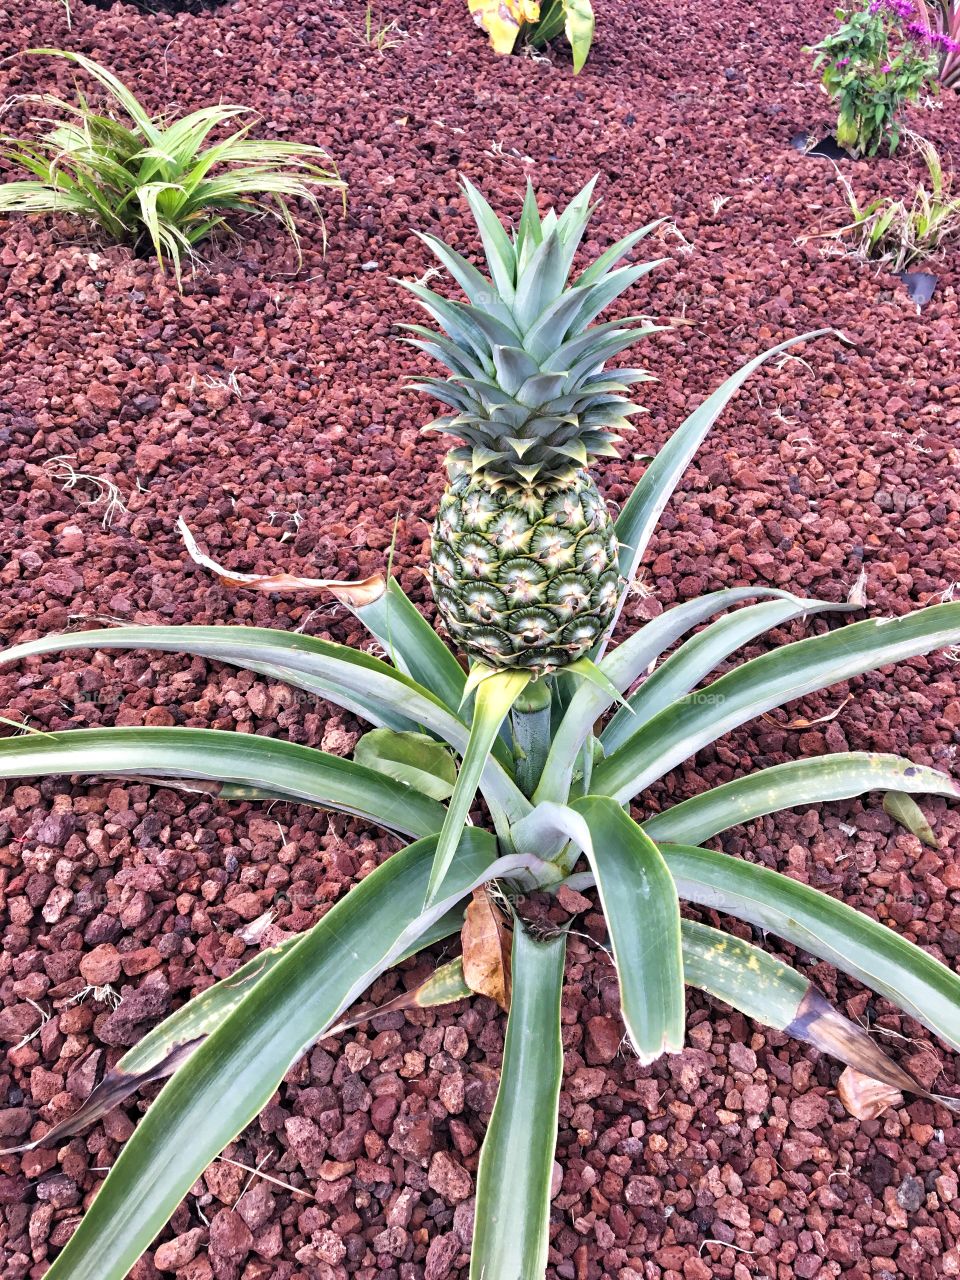 Who lives in a pineapple under the.. wait, what?